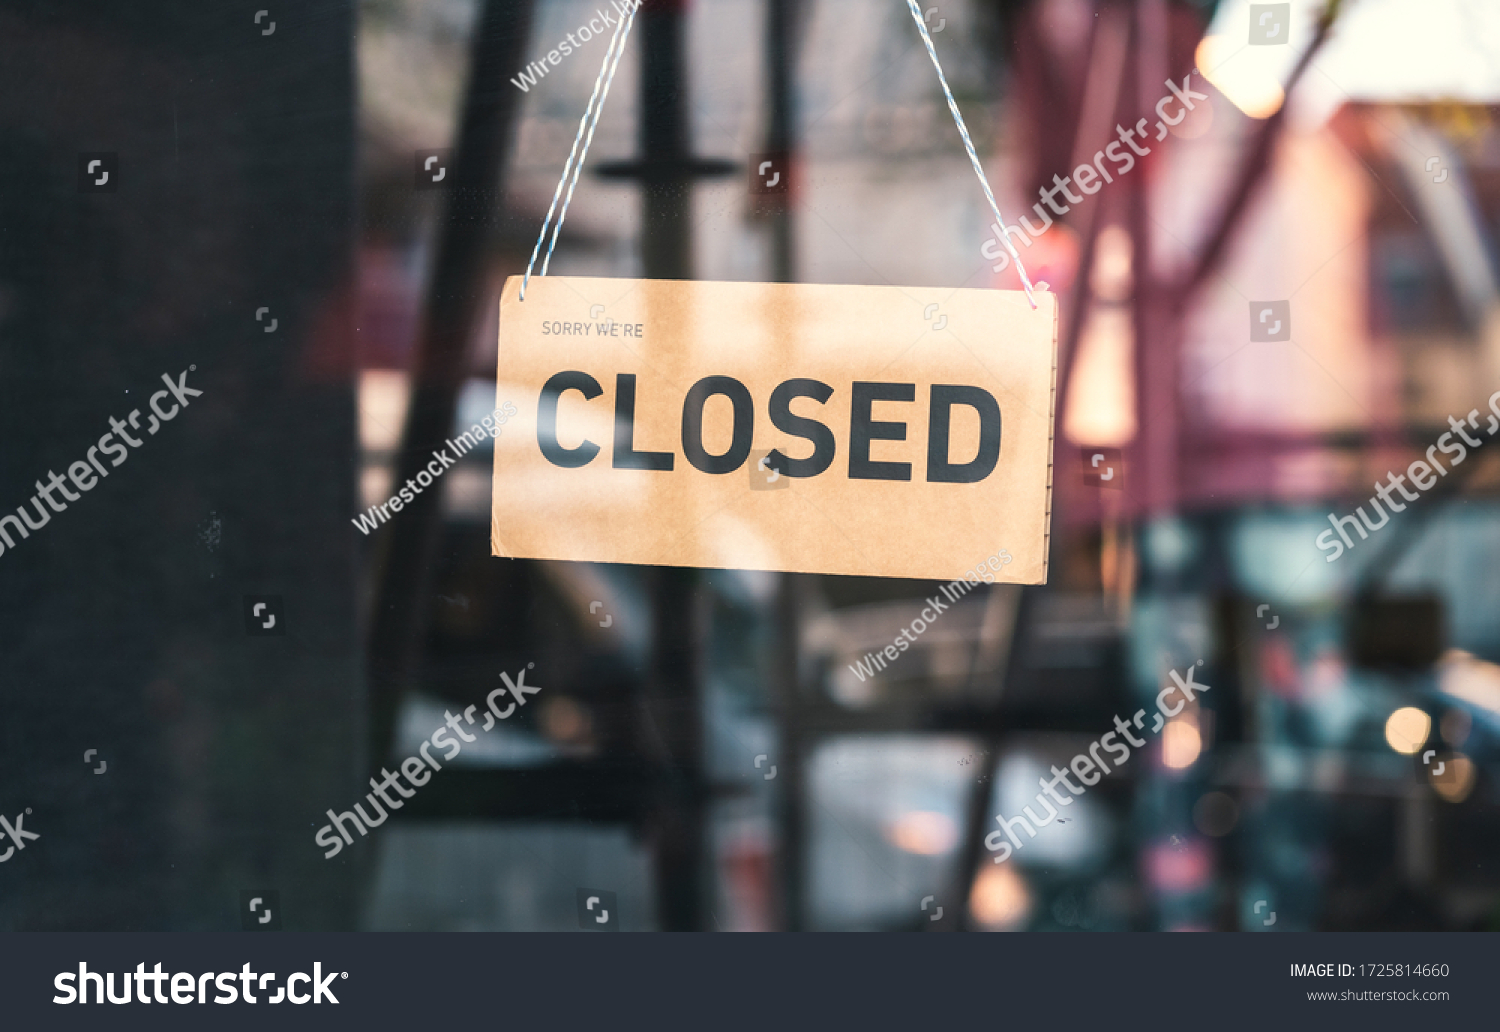 A sign that says "Sorry, we're closed". Shops in Munich and throughout Germany and Europe close due to financial difficulties and economic crisis. #1725814660